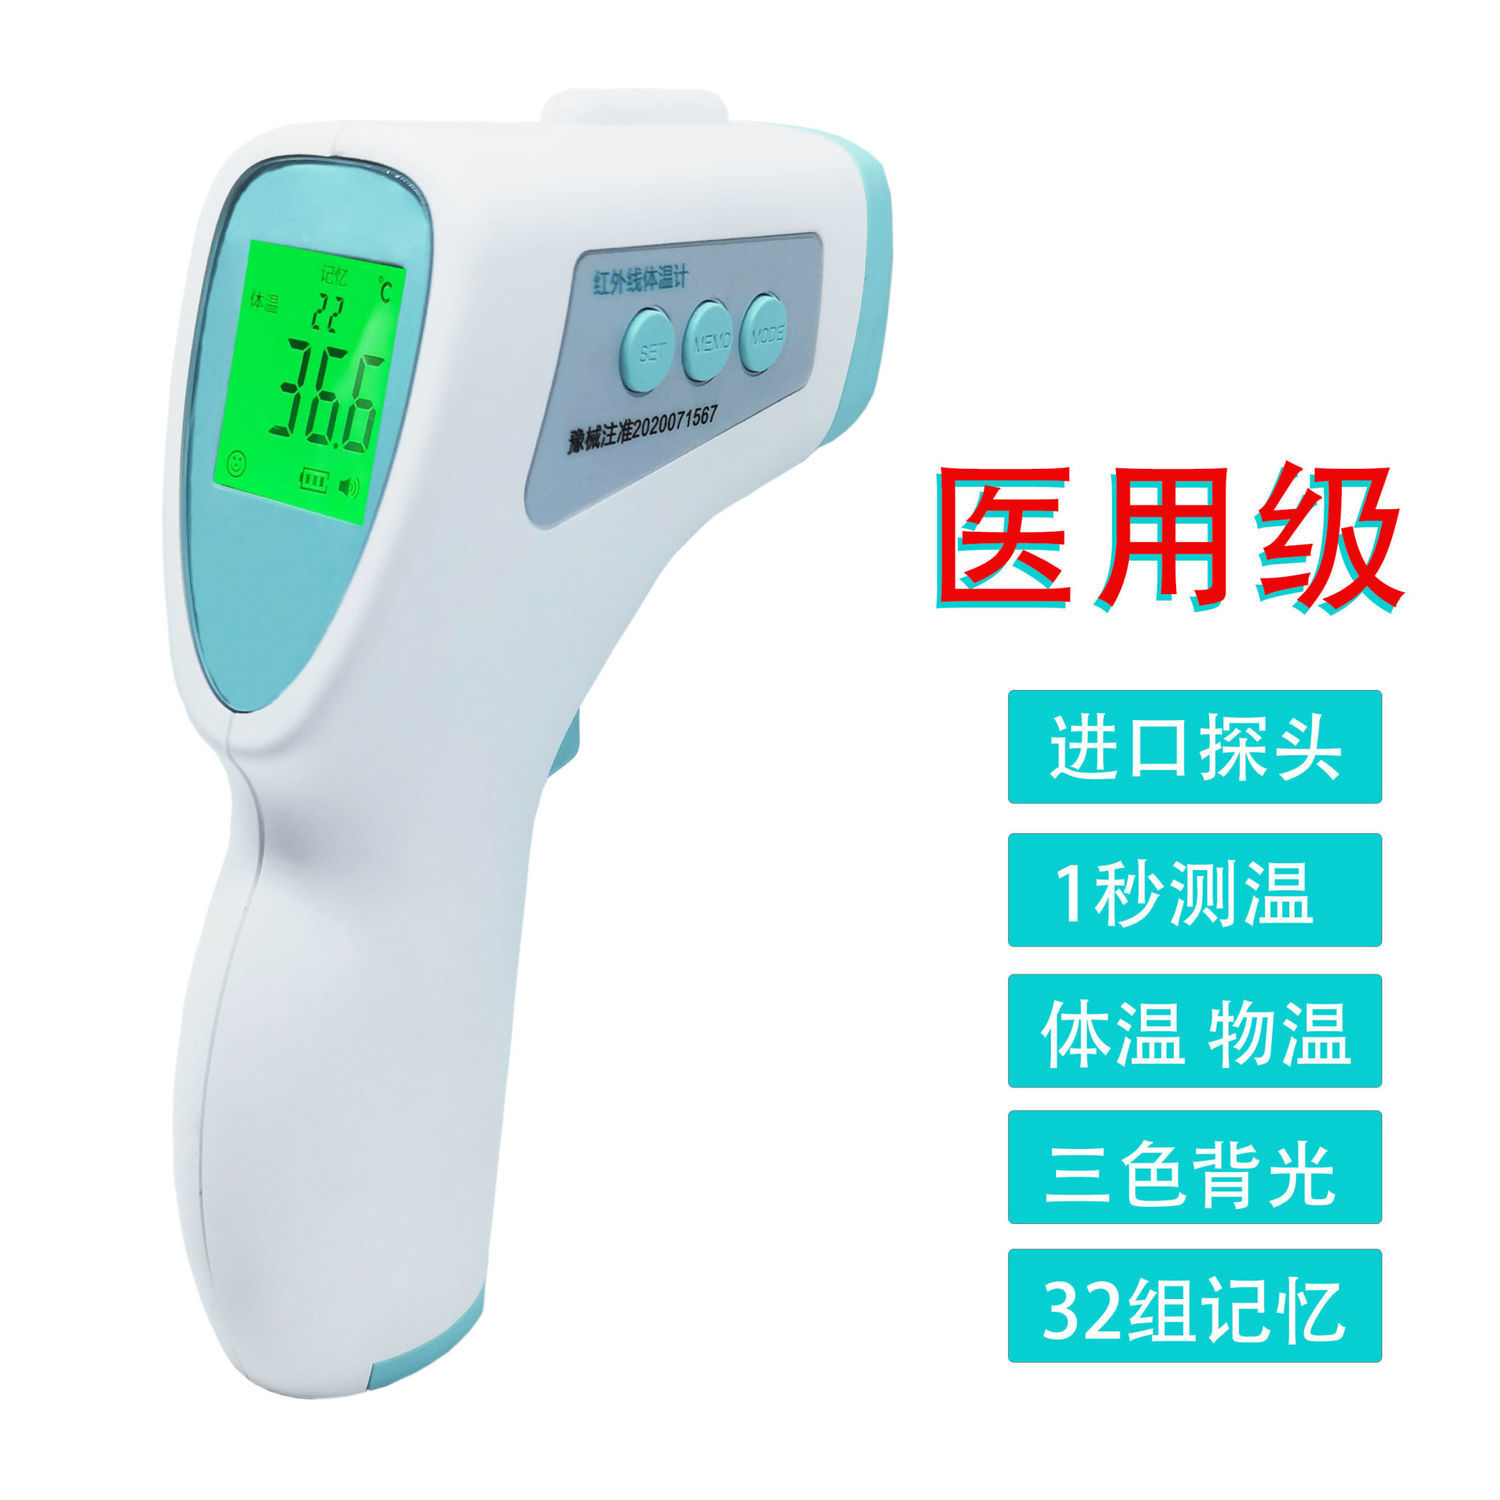 Forehead thermometer medical precise temperature gun household small electronic infrared non-contact forehead thermometer for children and adults